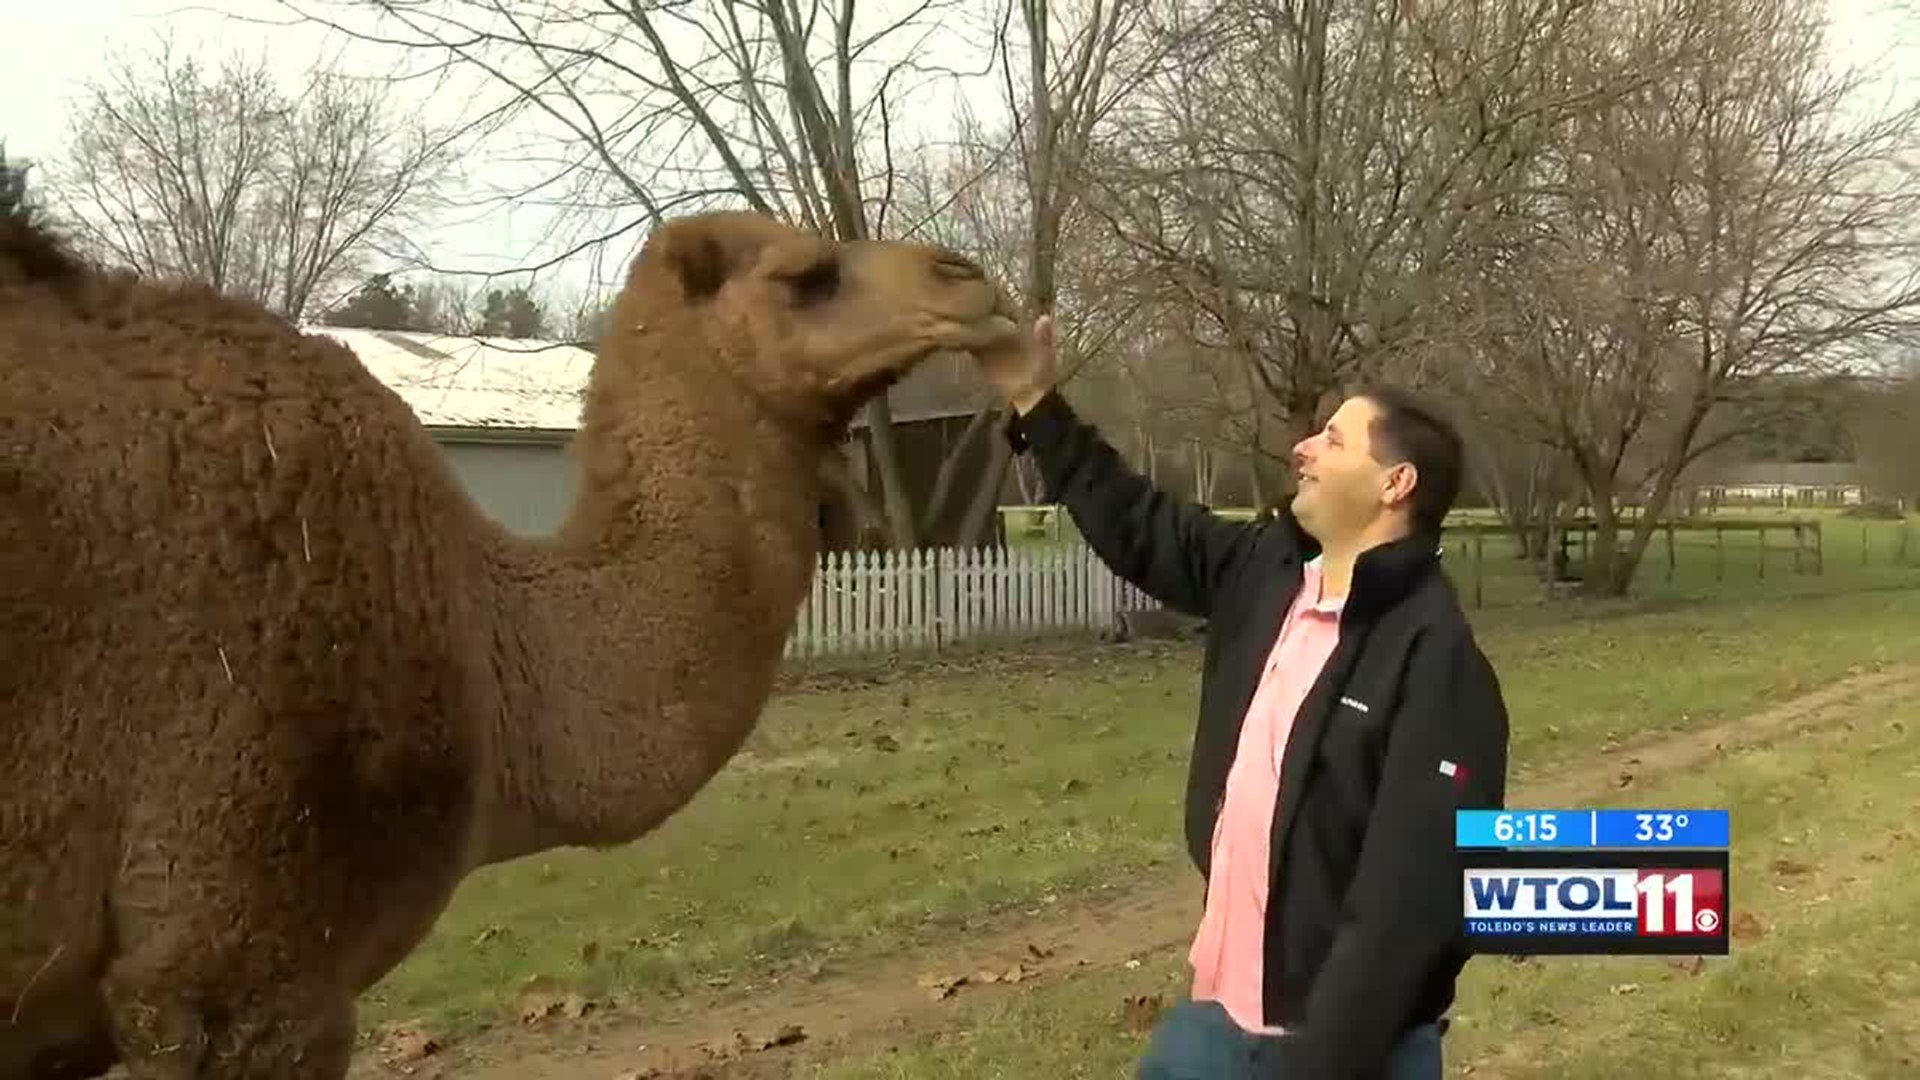 Scooby the camel takes over the streets of Toledo